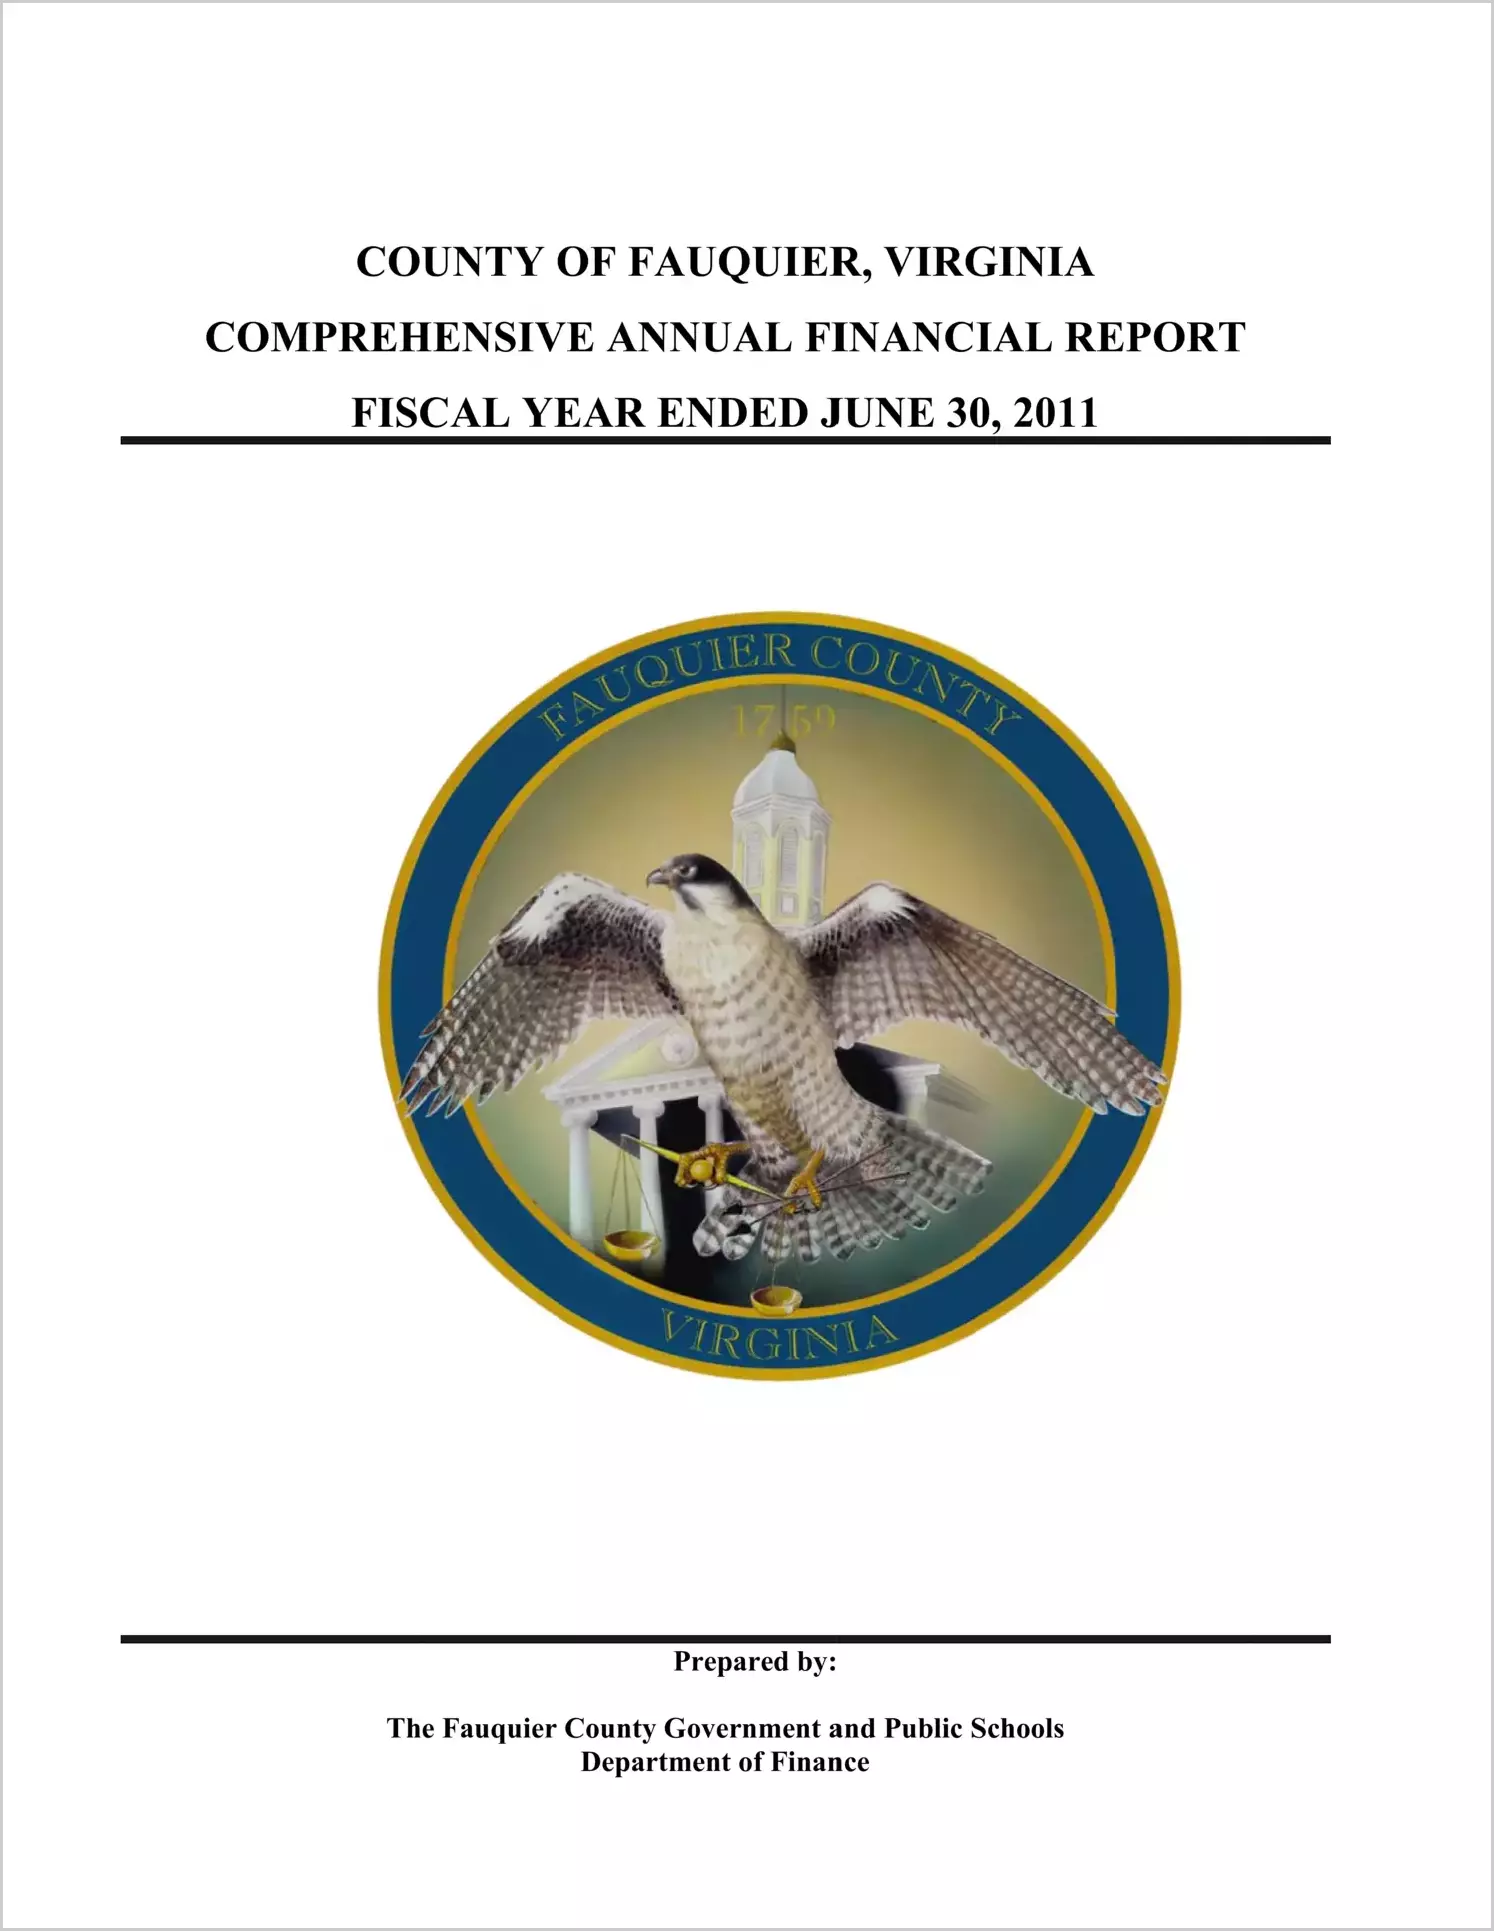 2011 Annual Financial Report for County of Fauquier